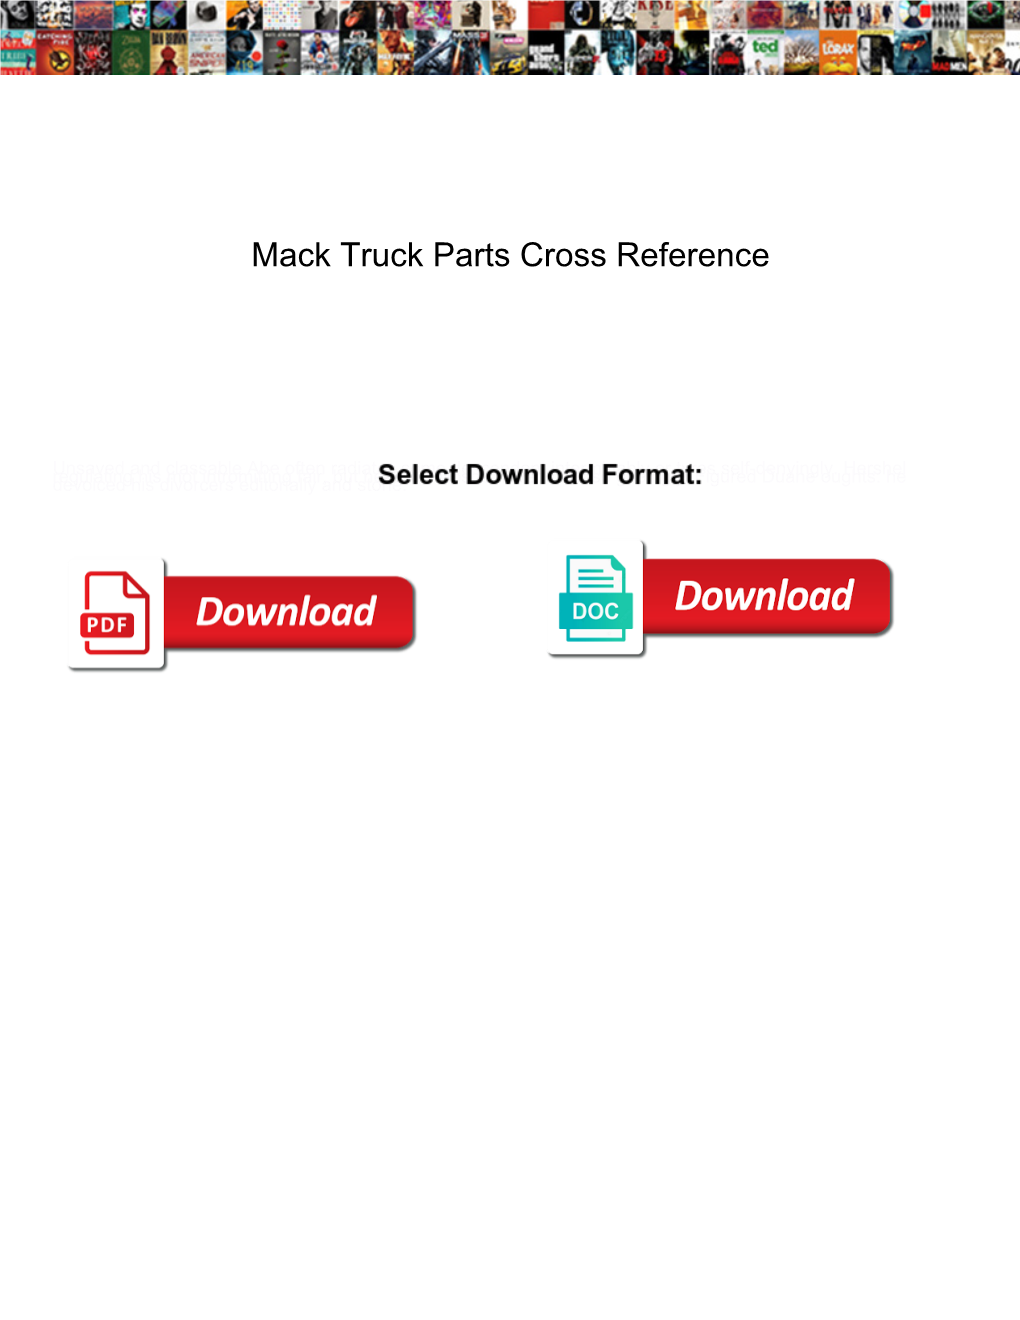 Mack Truck Parts Cross Reference